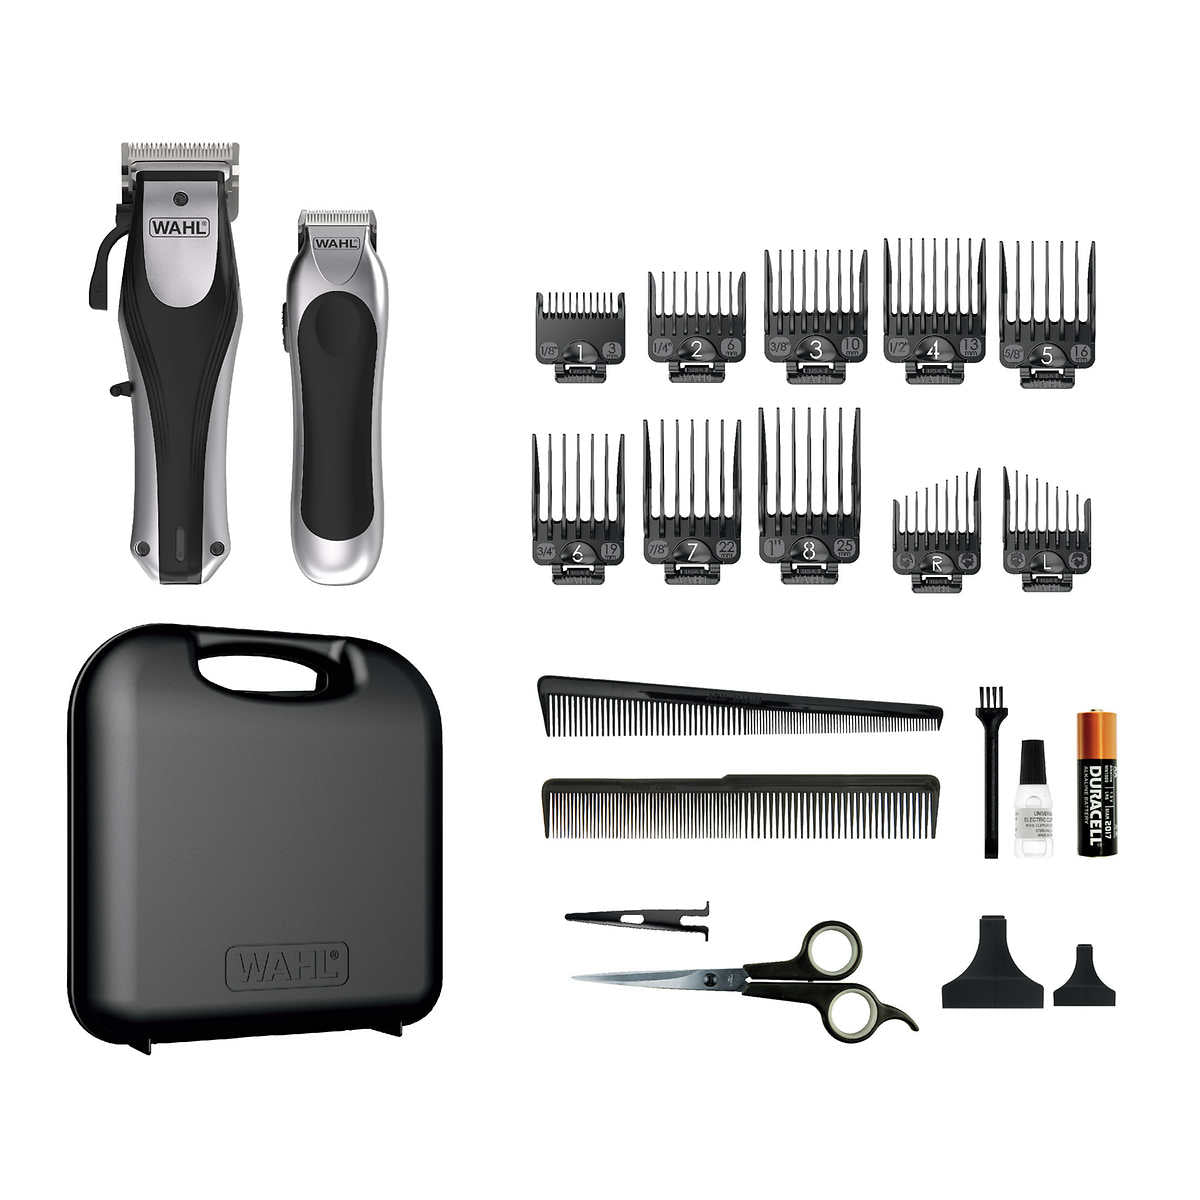 Wahl Pro Series Multi-Cut Cord/Cordless Complete Haircutting Kit, returned item